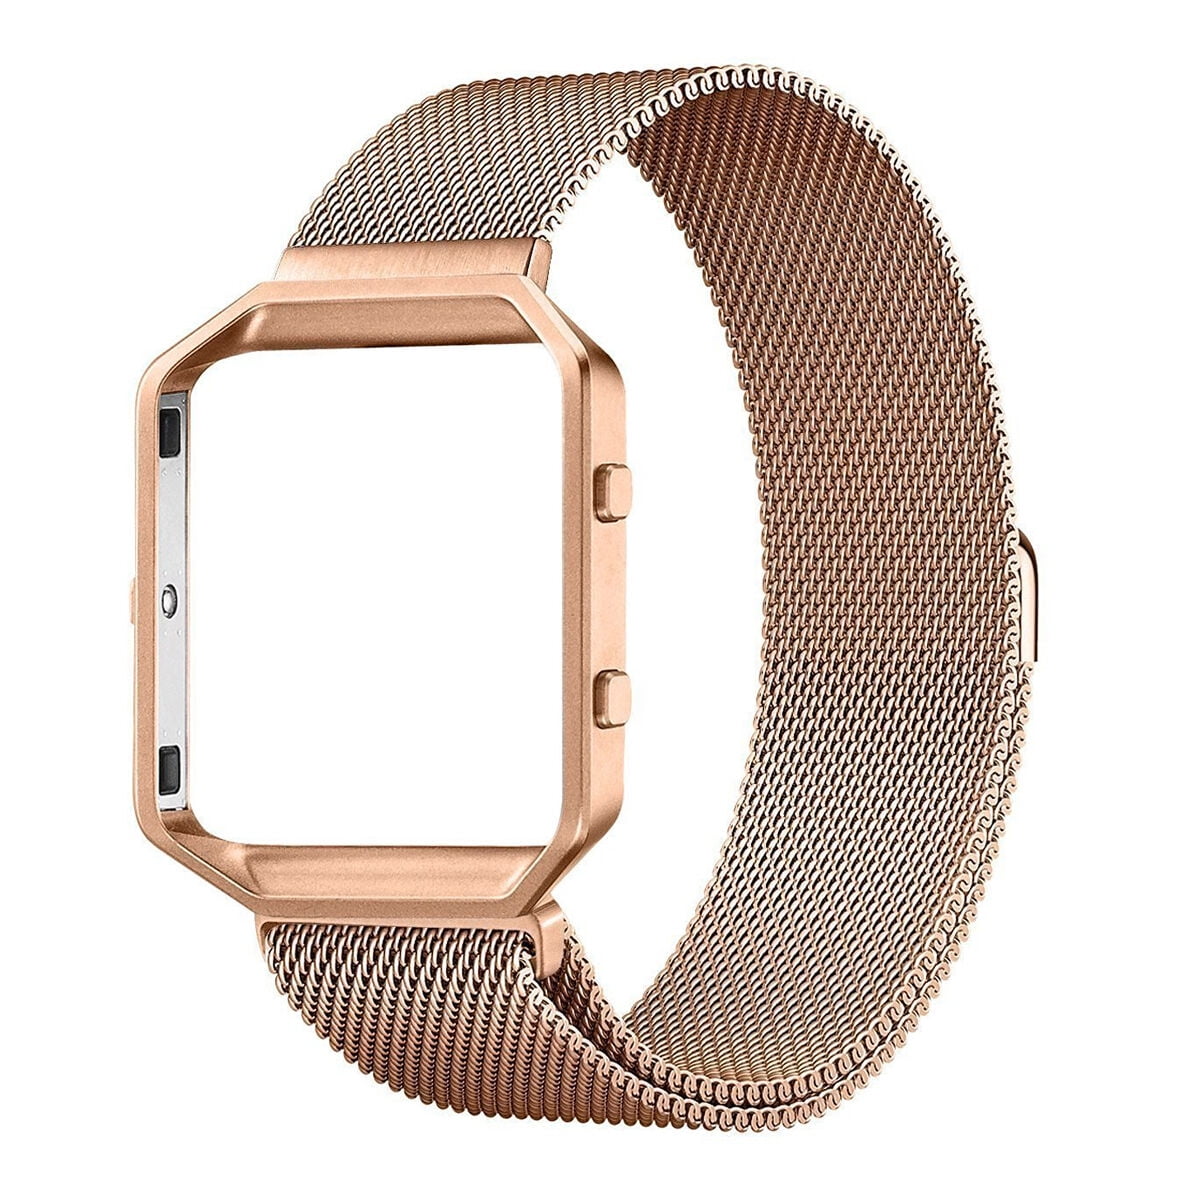 Stainless Steel Chain Adjustable Bands w/ Metal Frame for Fitbit Blaze Tracker 